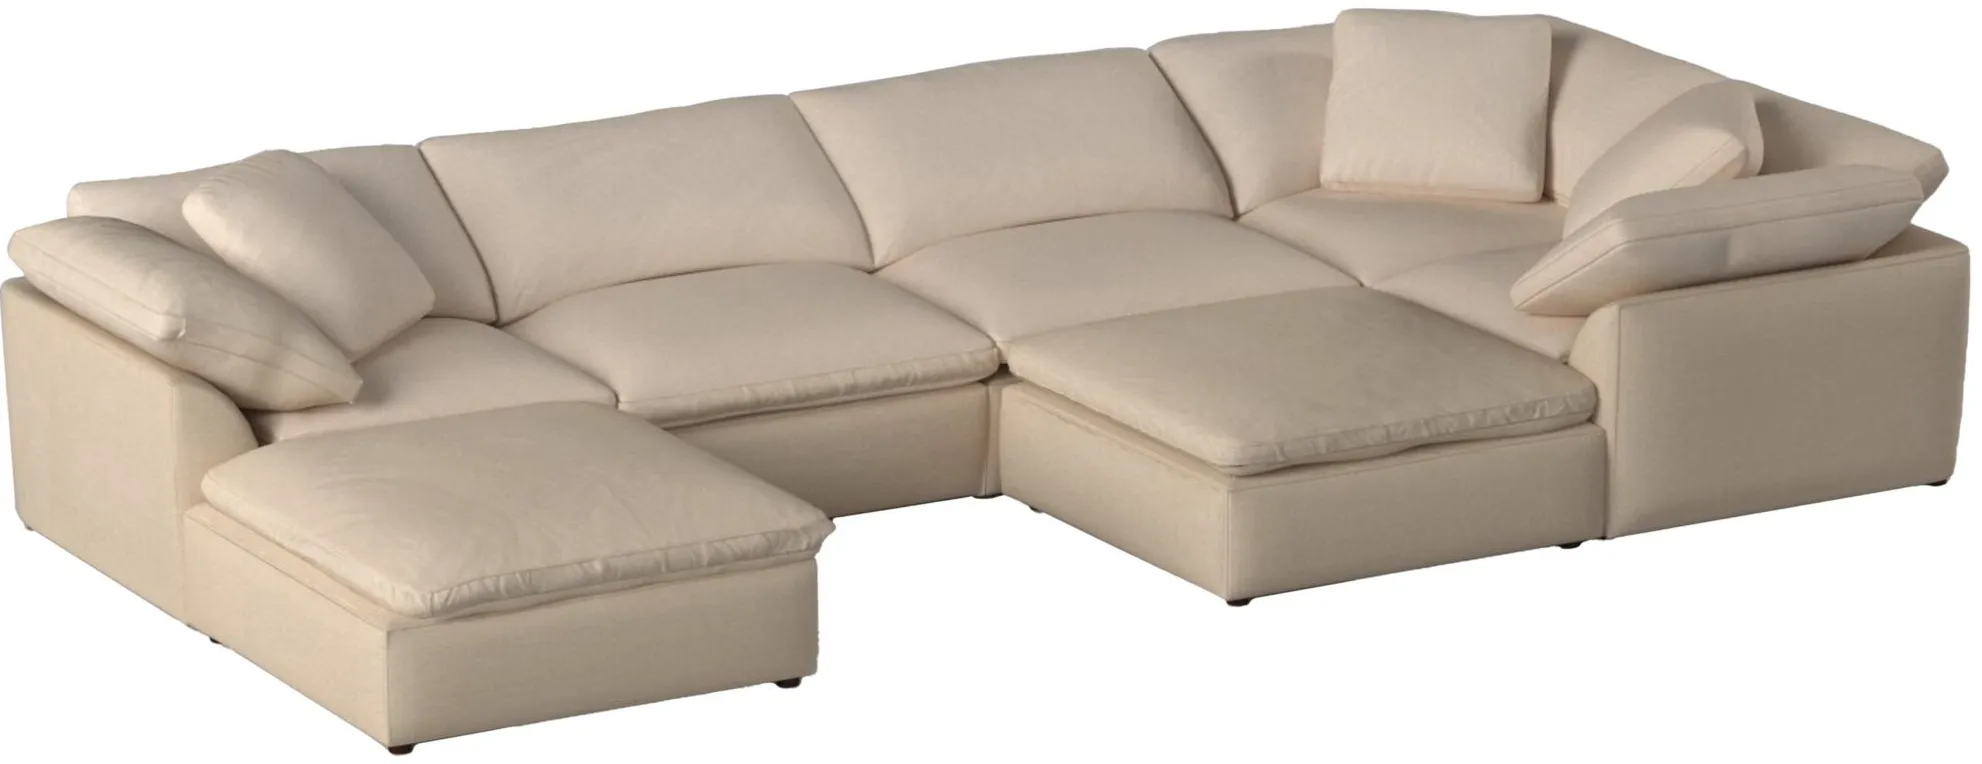 Puff Slipcover 7-pc. Sectional in Tan by Sunset Trading